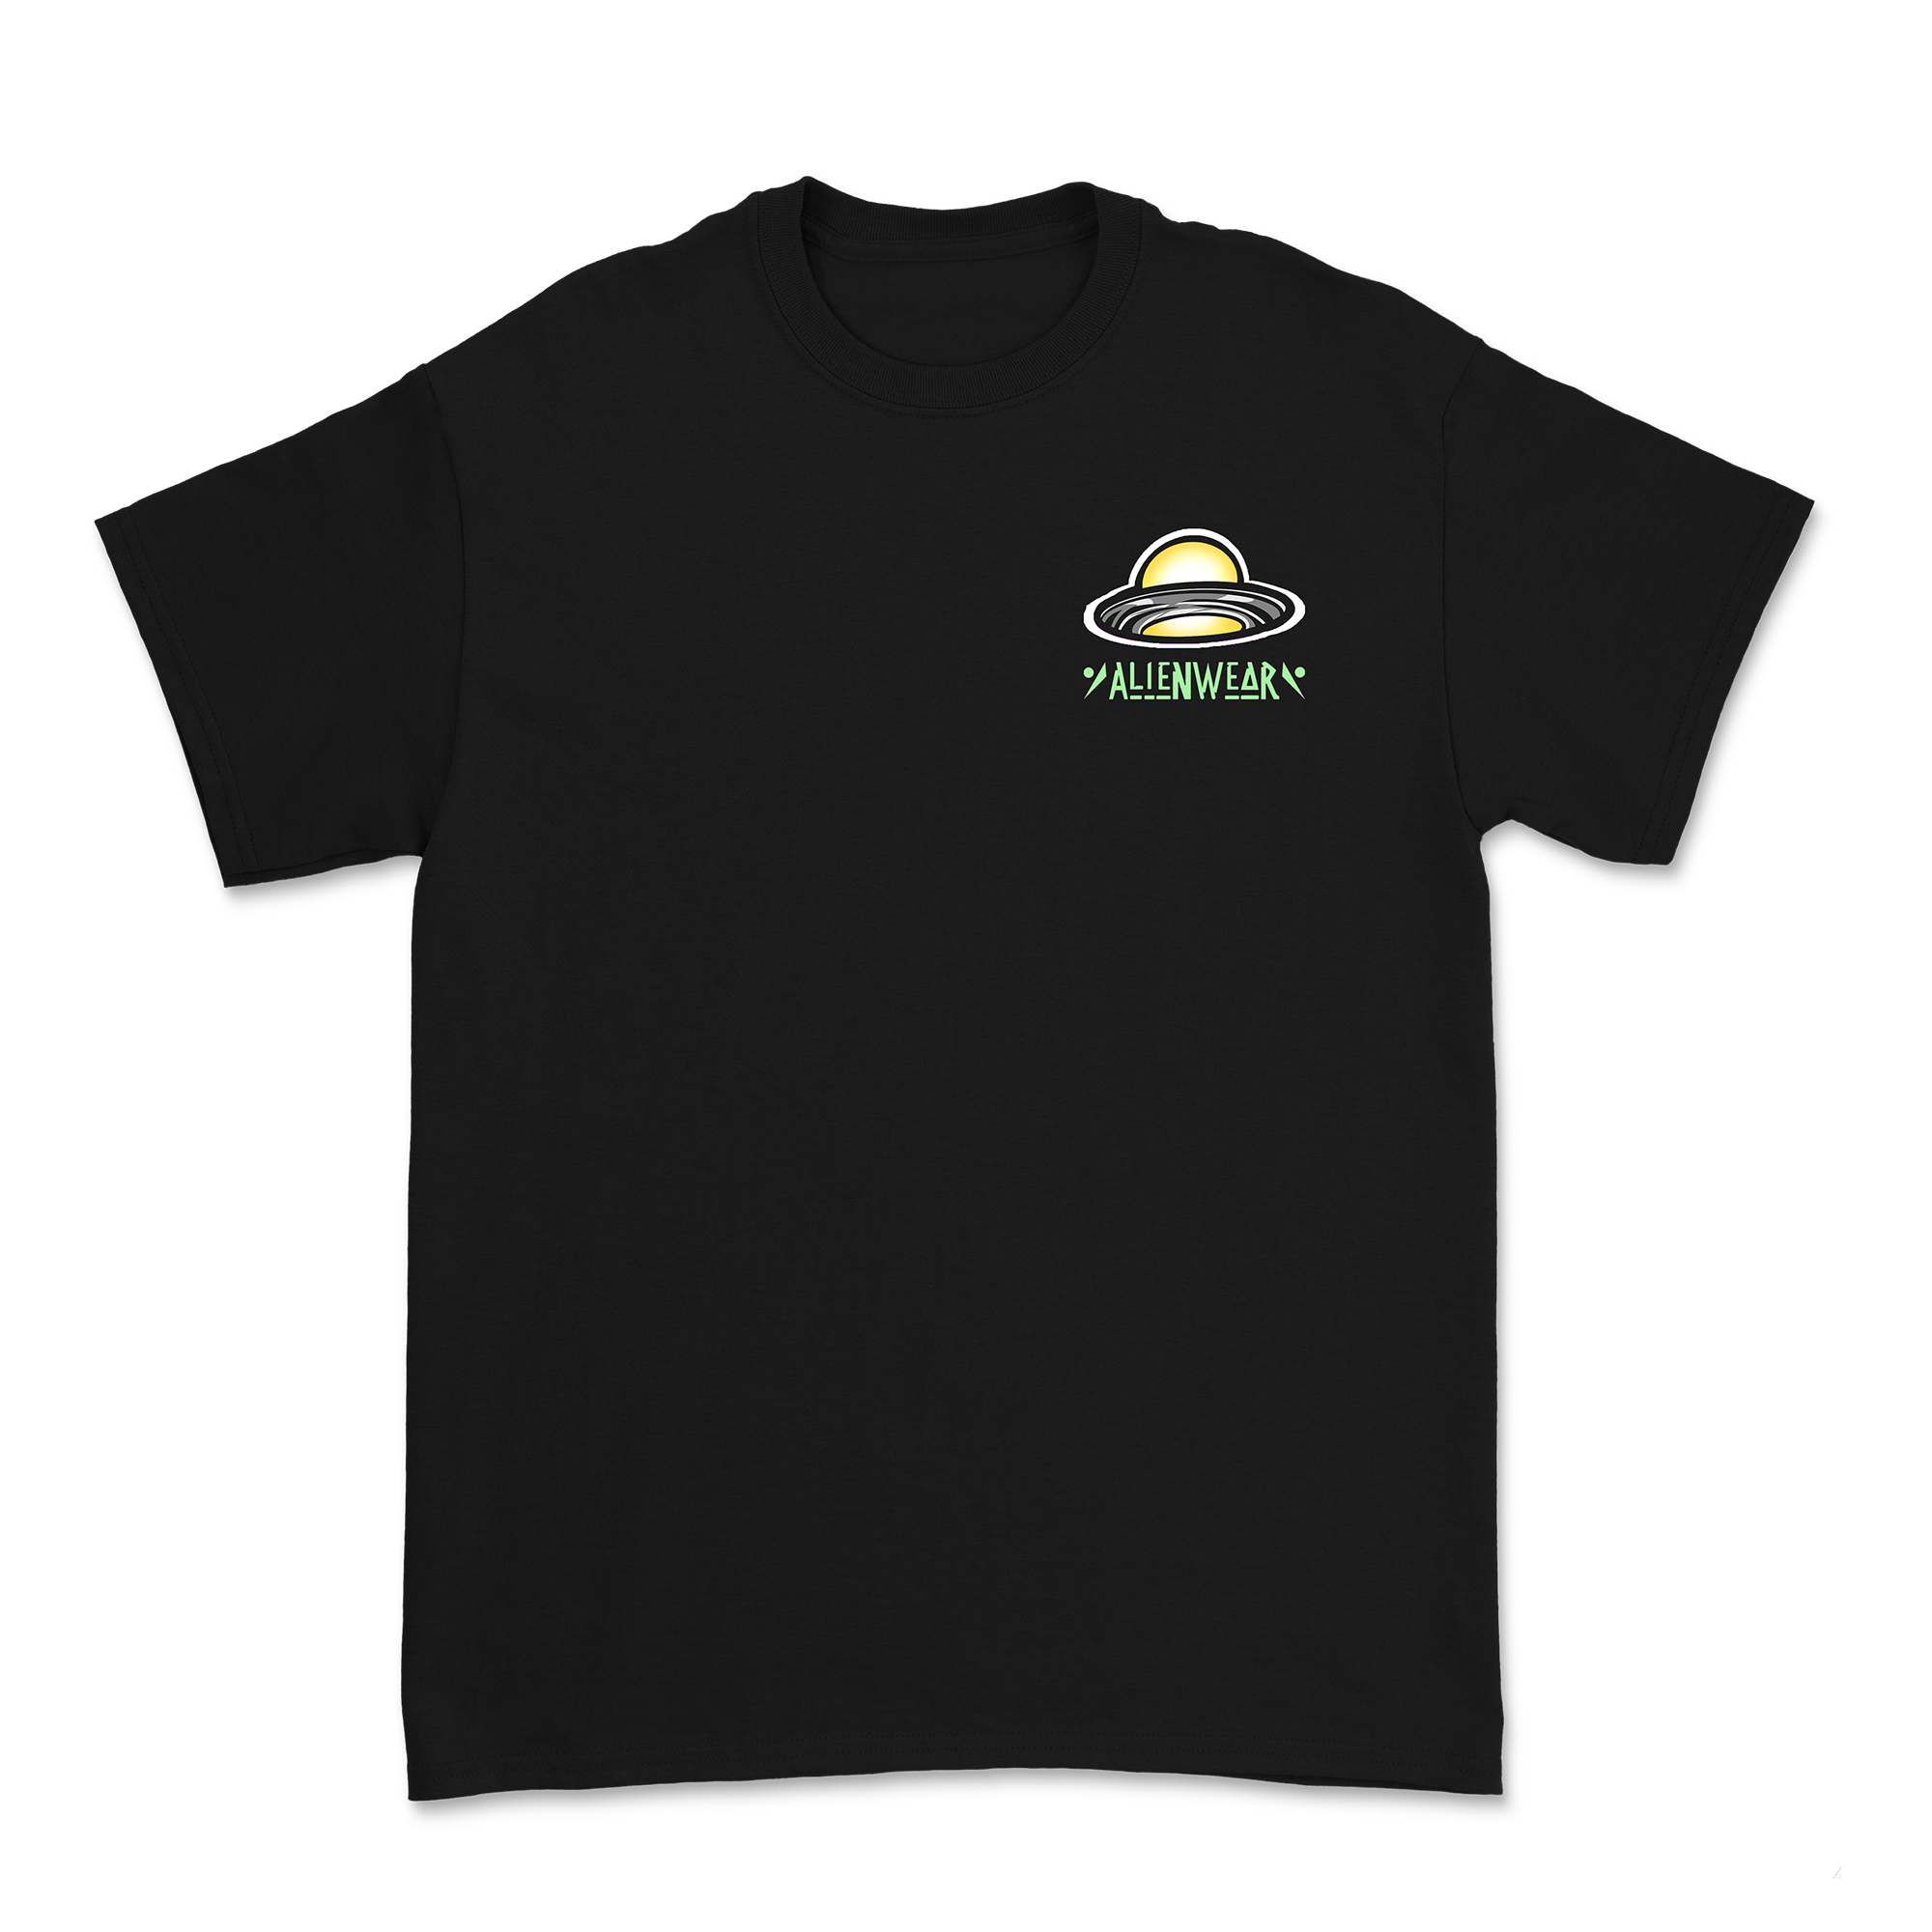 AlienWear - We Come In Peace T-Shirt